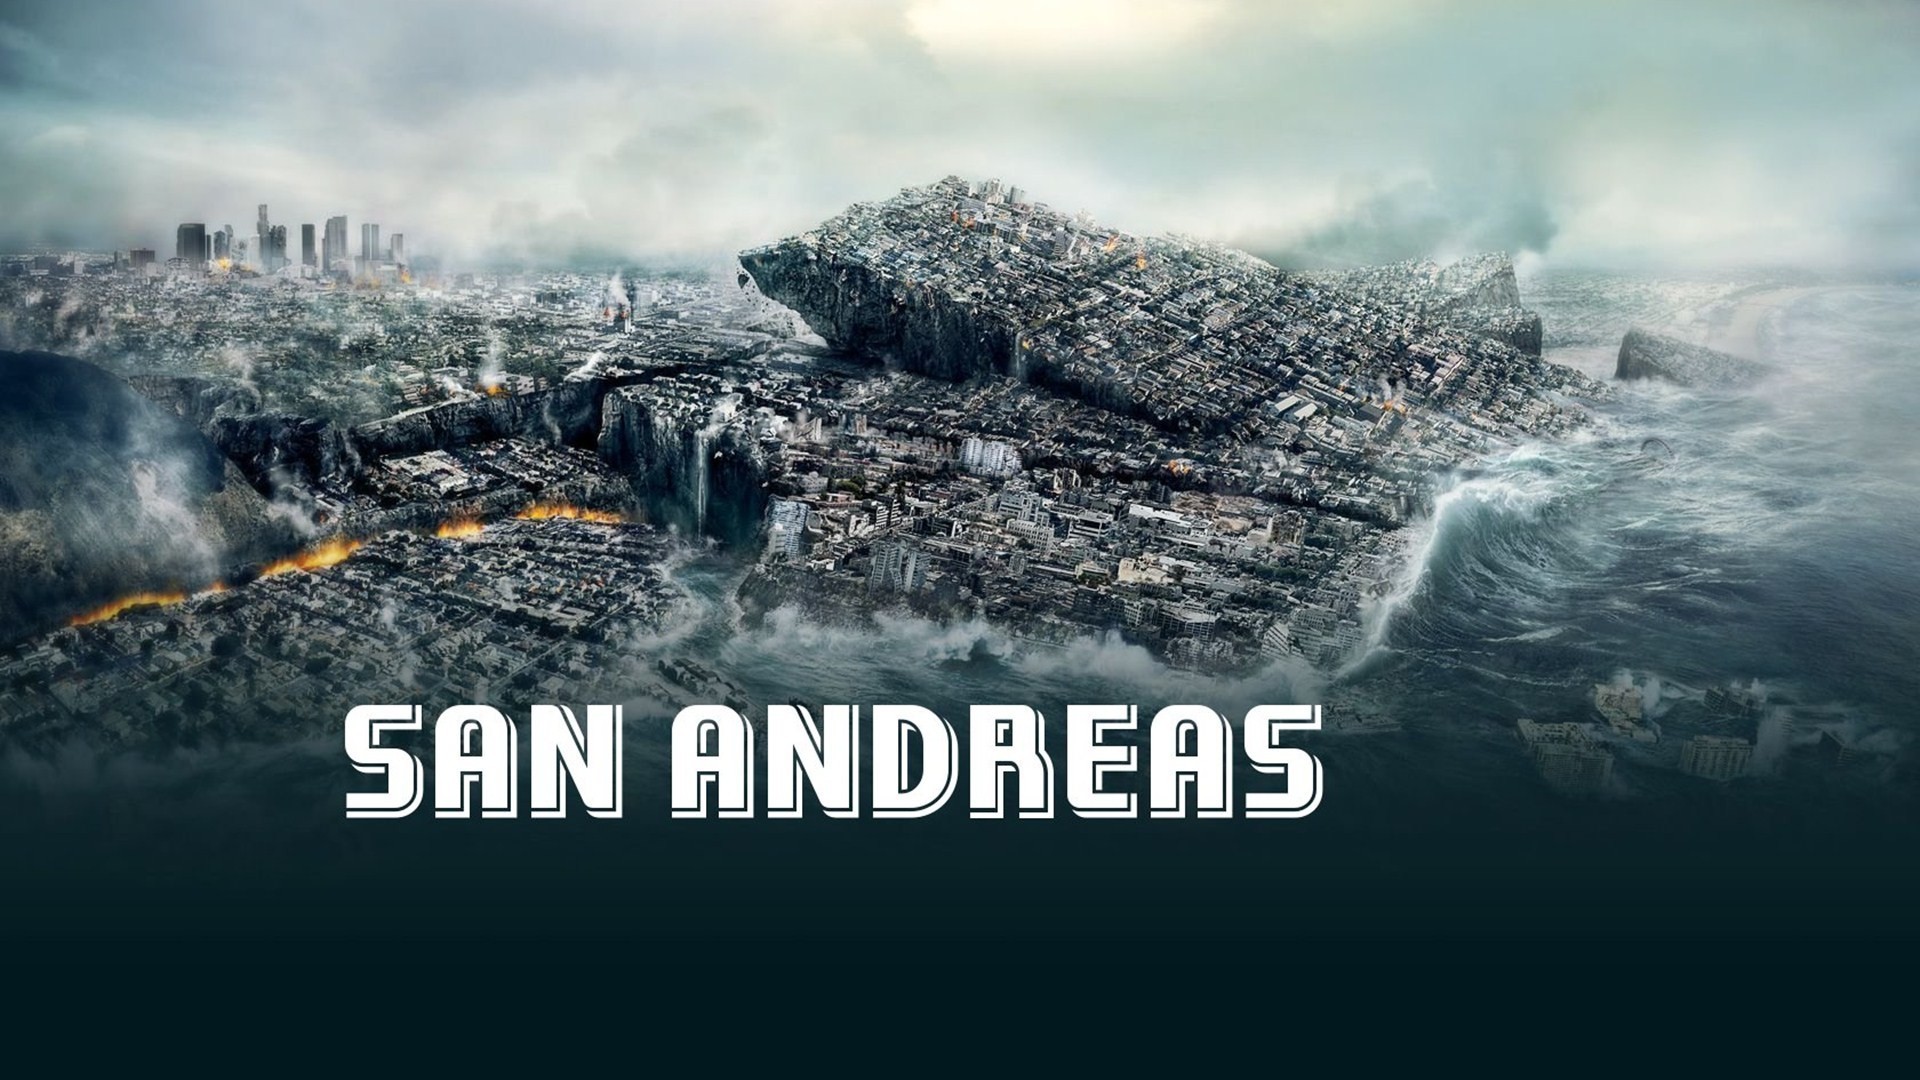 1920x1080 ... San Andreas 2015 Movie Wallpapers HD Images Pictures - All HD .